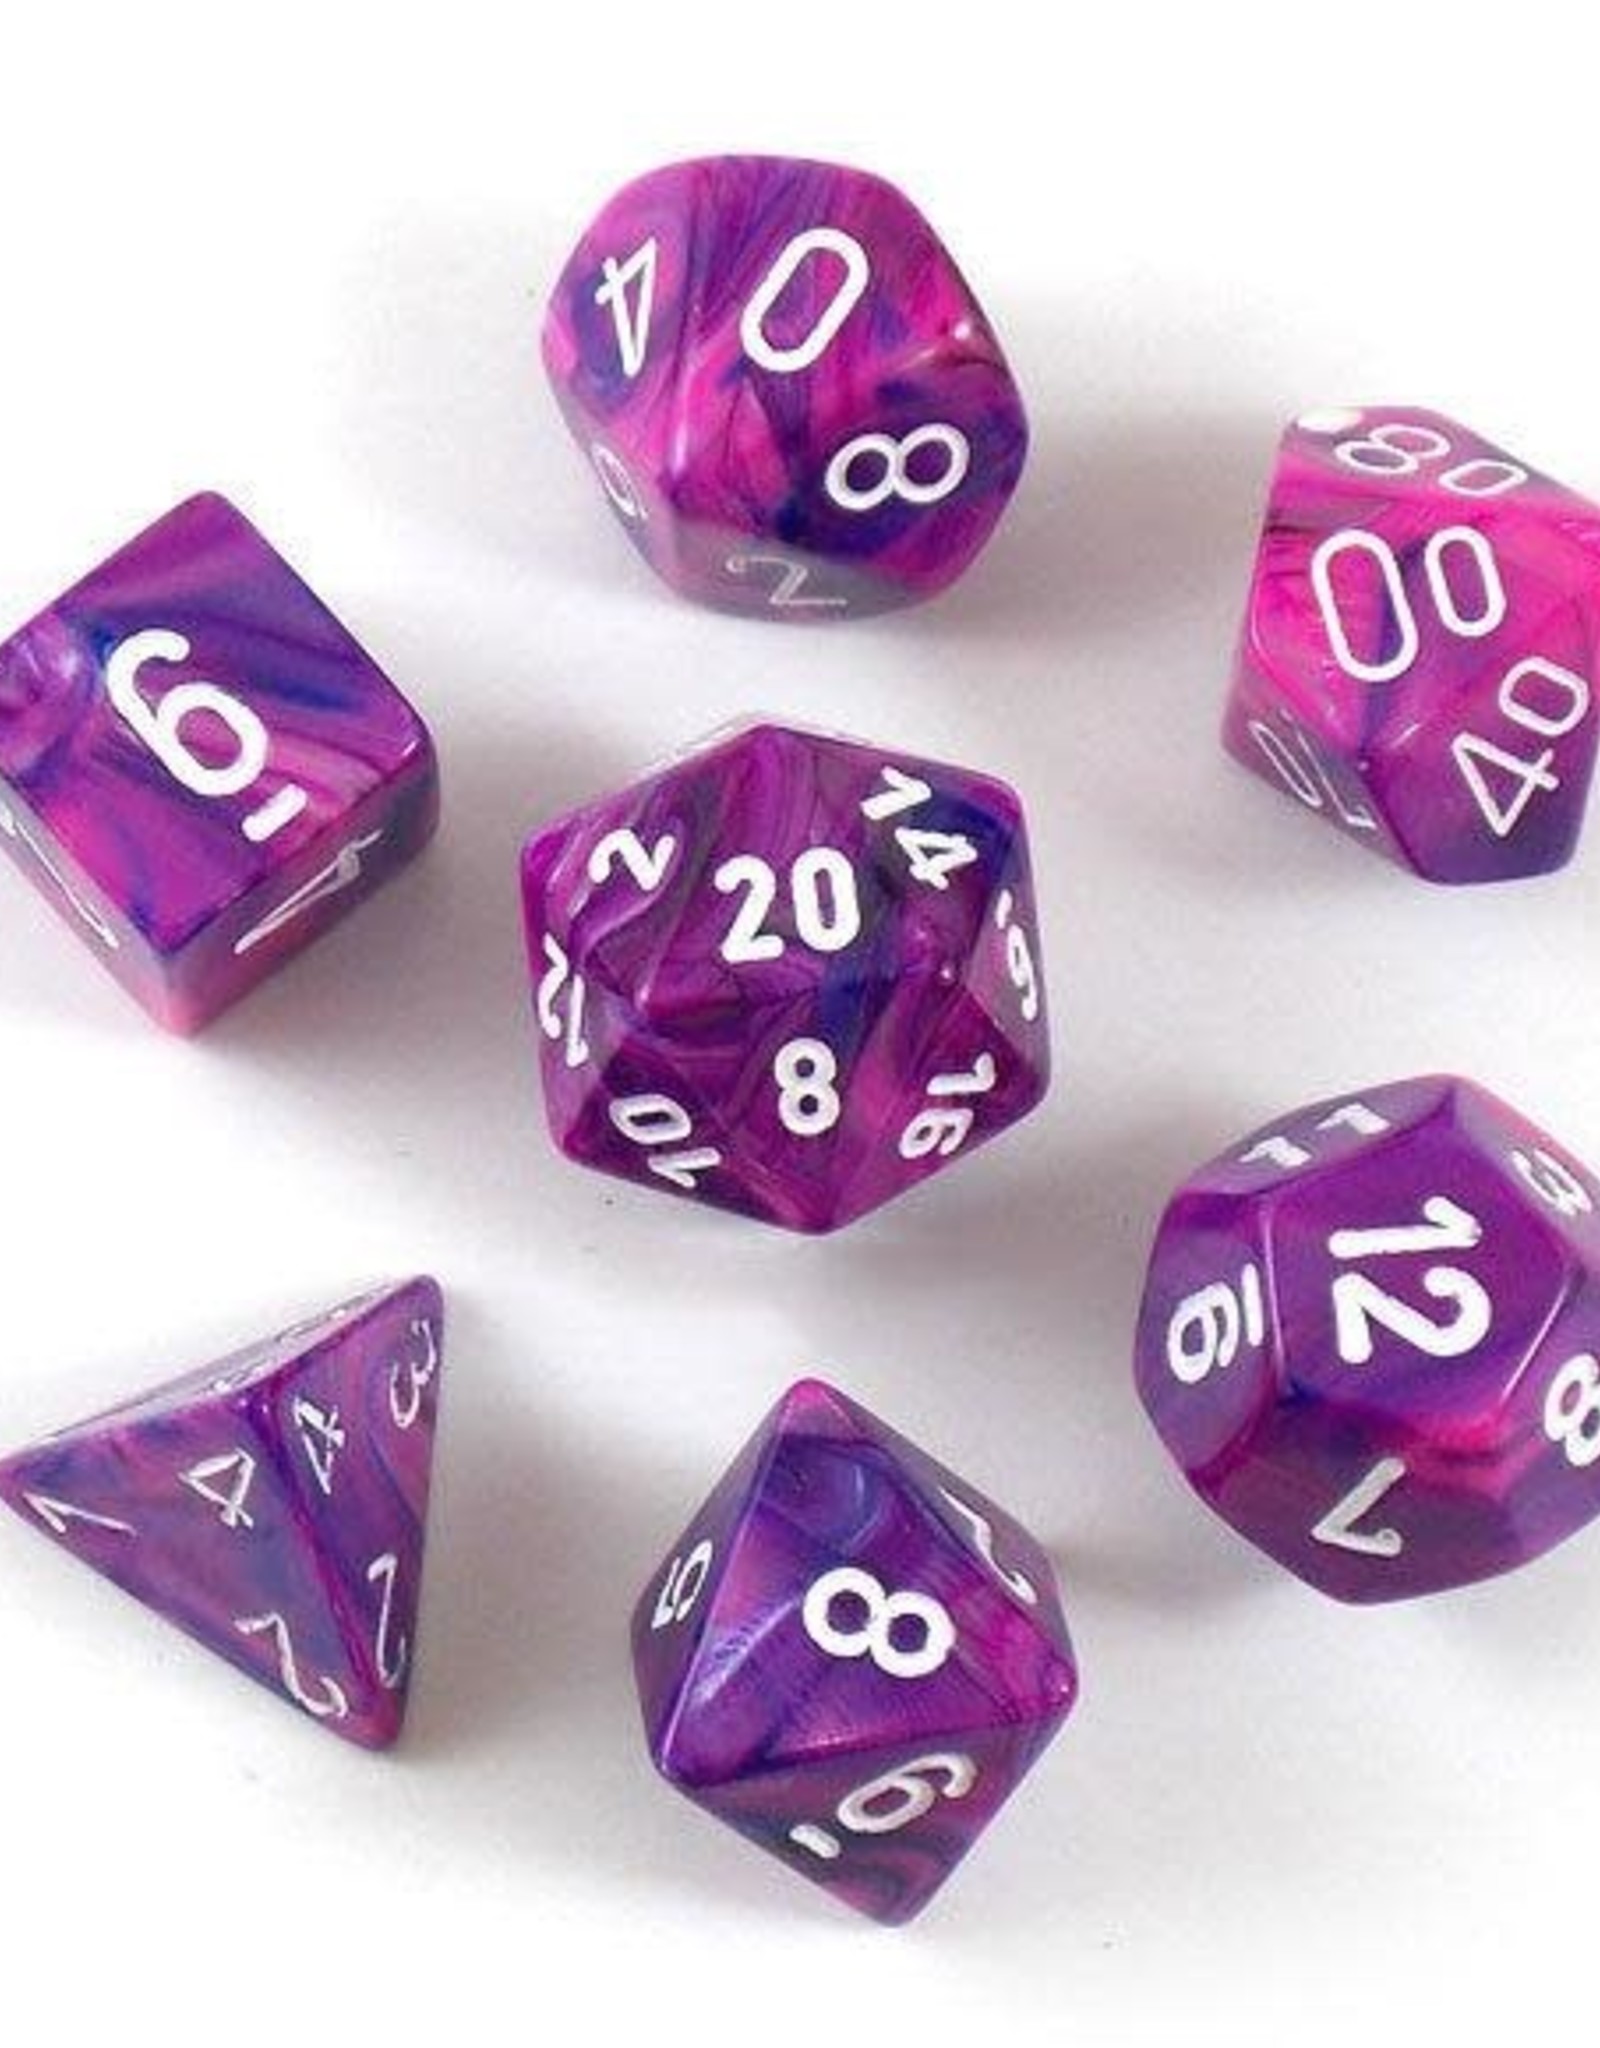 Chessex Dice - 7pc Festive Polyhedral- Violet/White